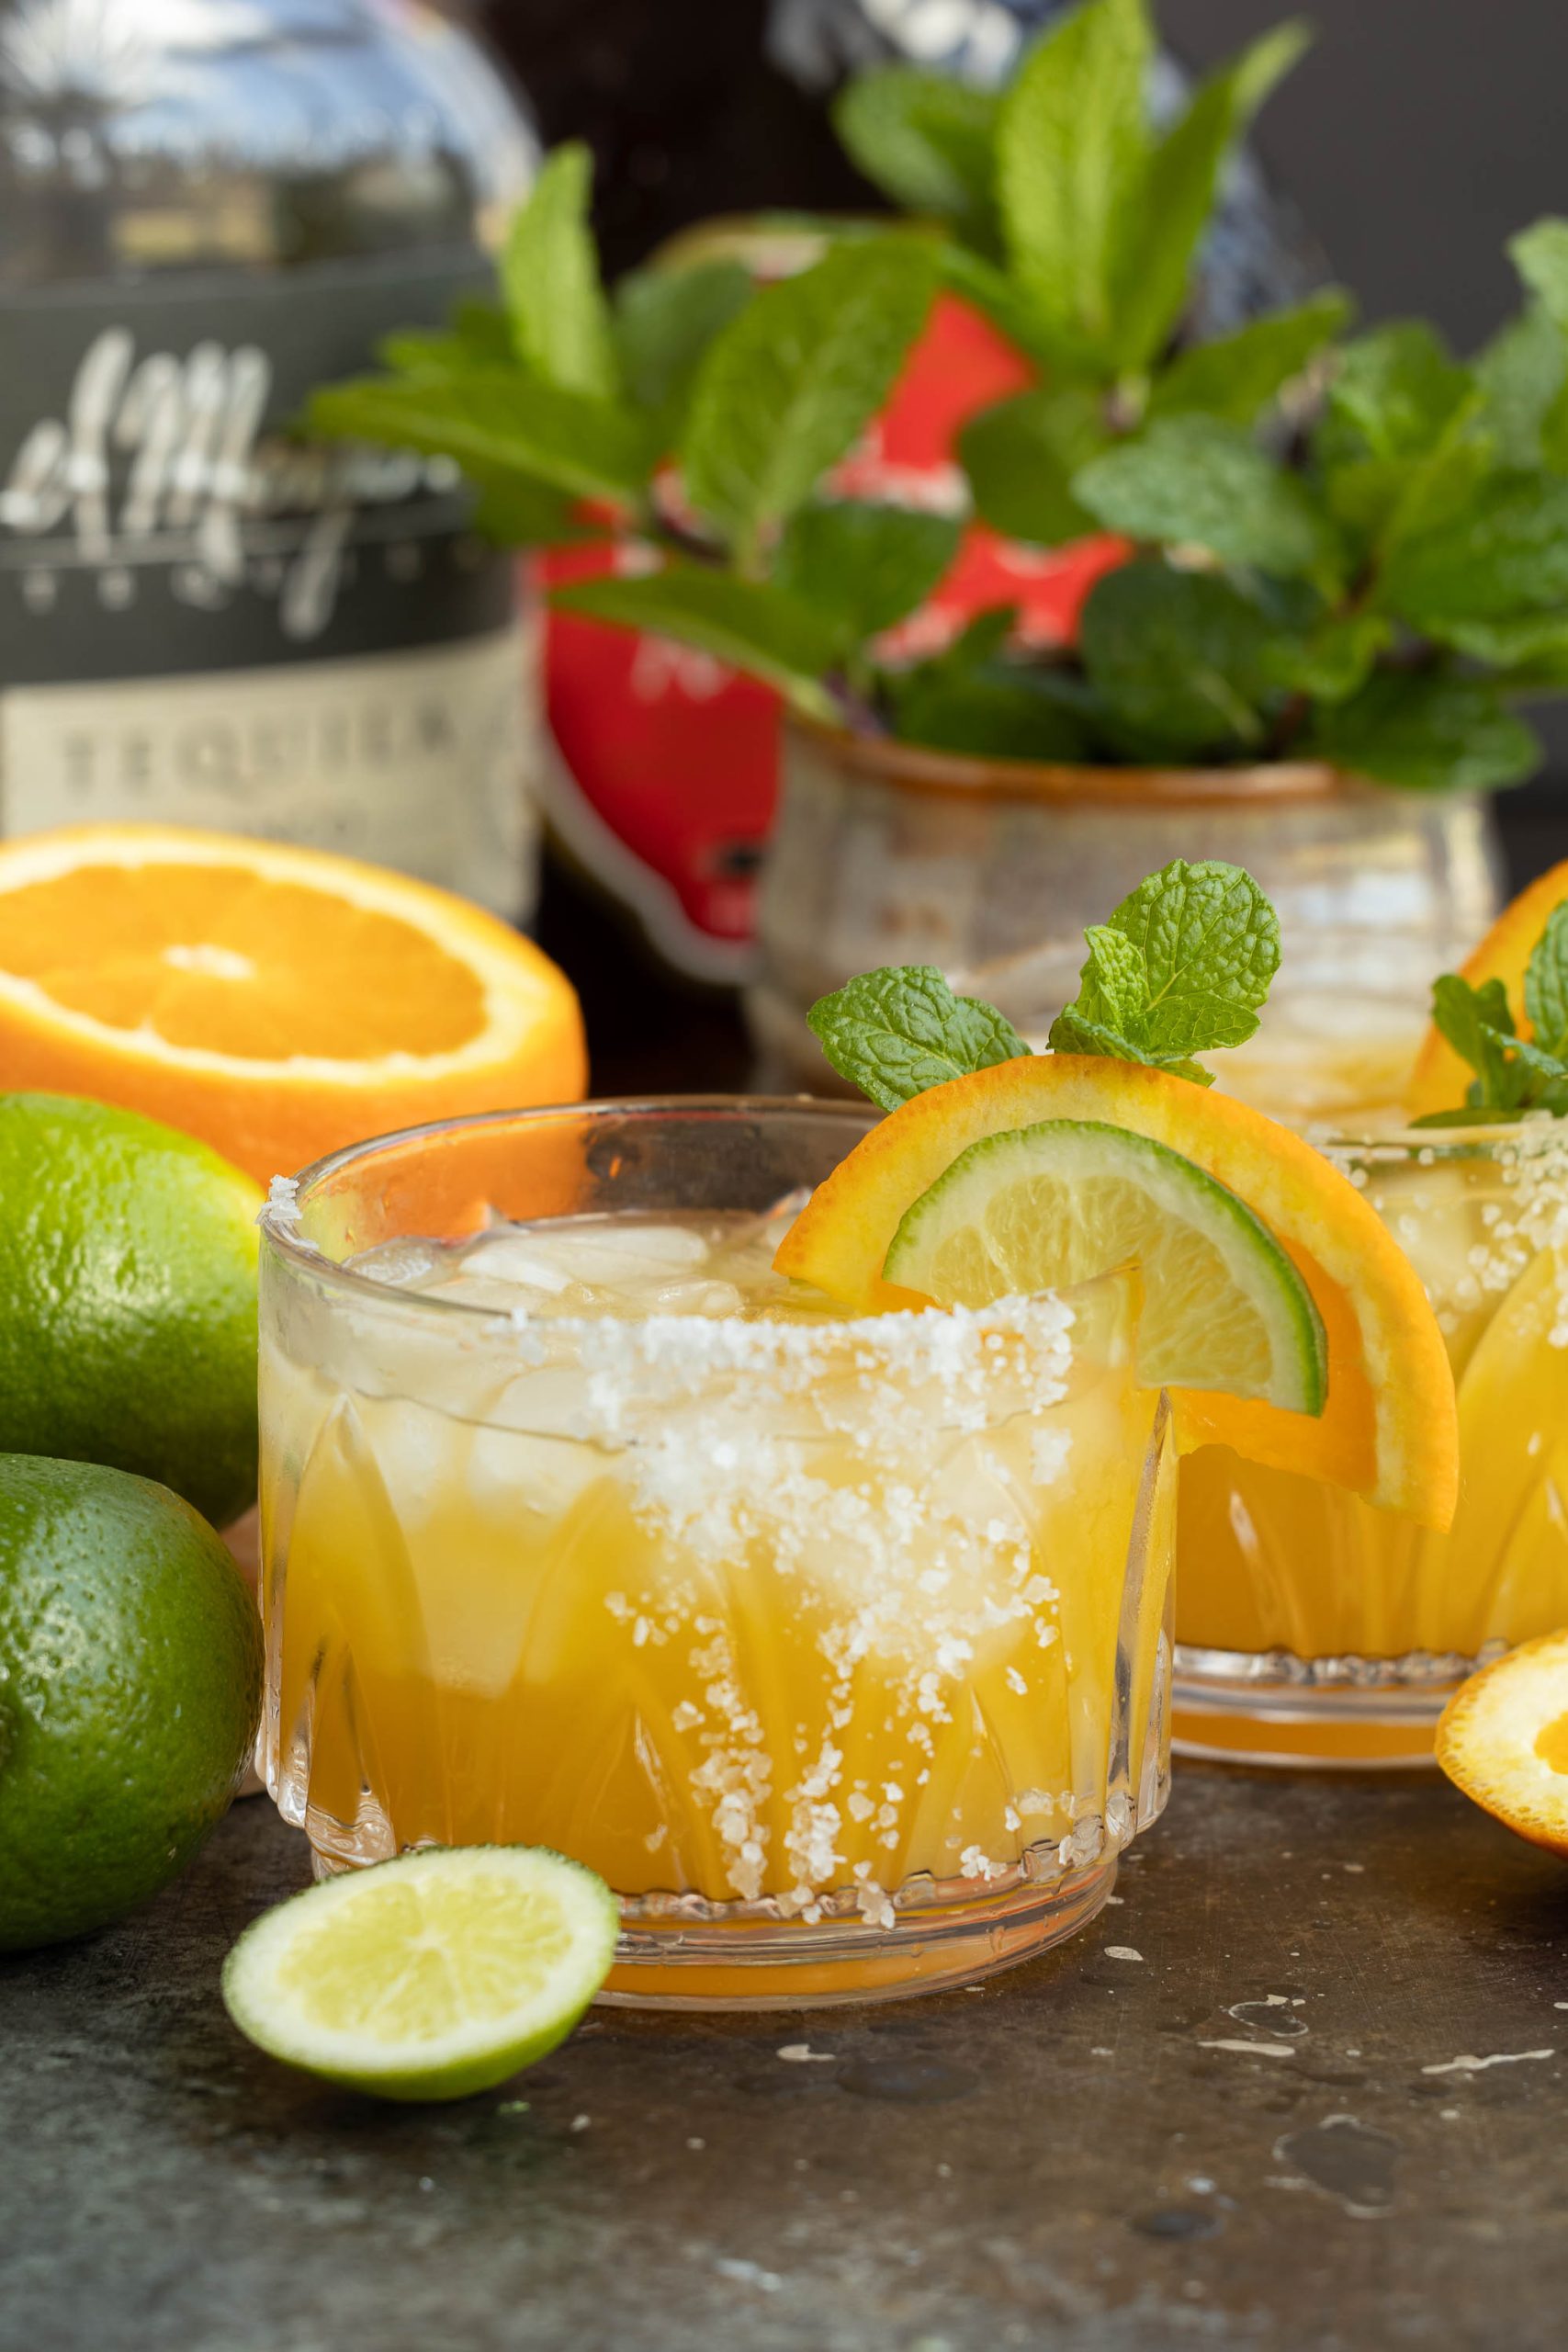 Two citrus cocktails garnished with orange slices and mint, accompanied by fresh fruit and a bottle in the background.